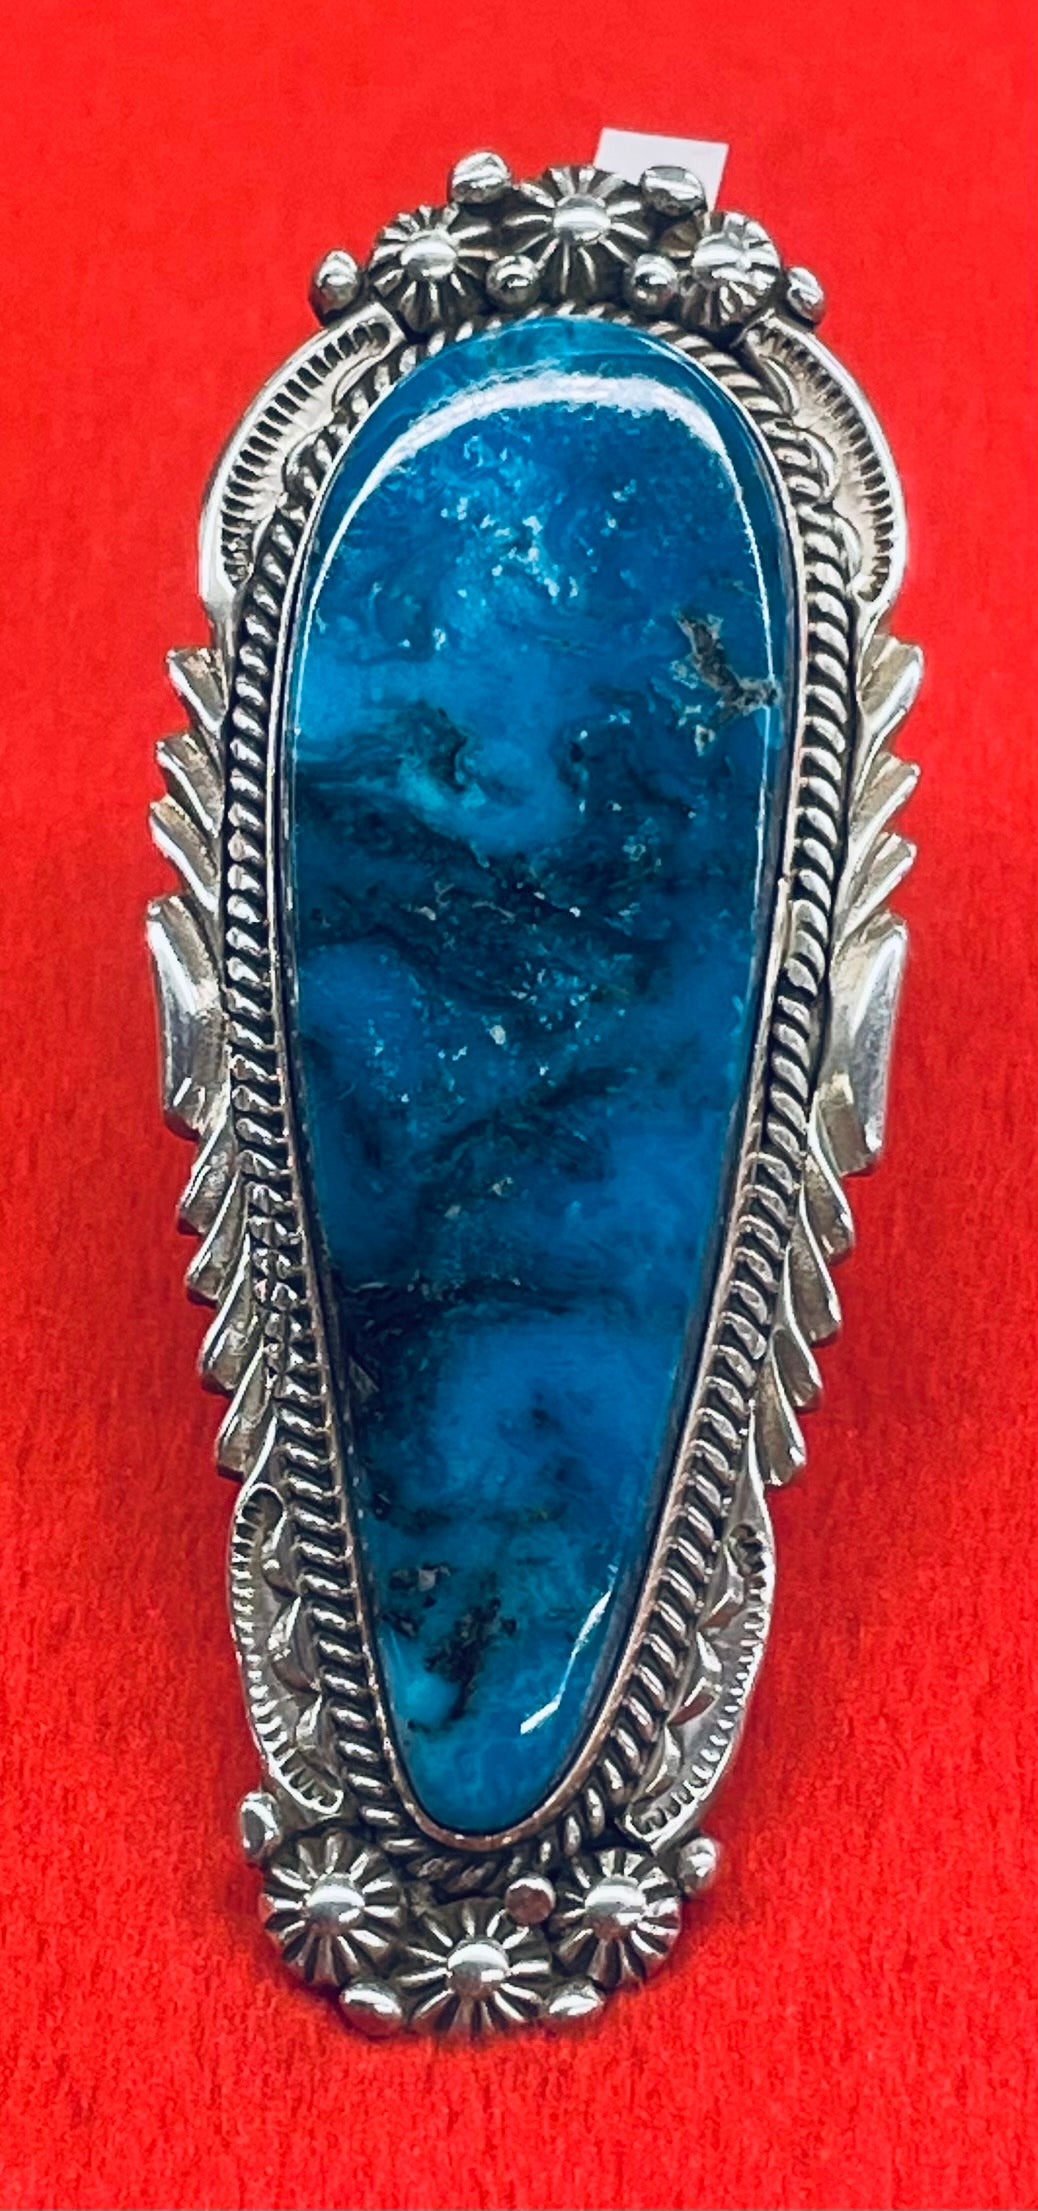 Large Turquoise Stone and Silver Ring